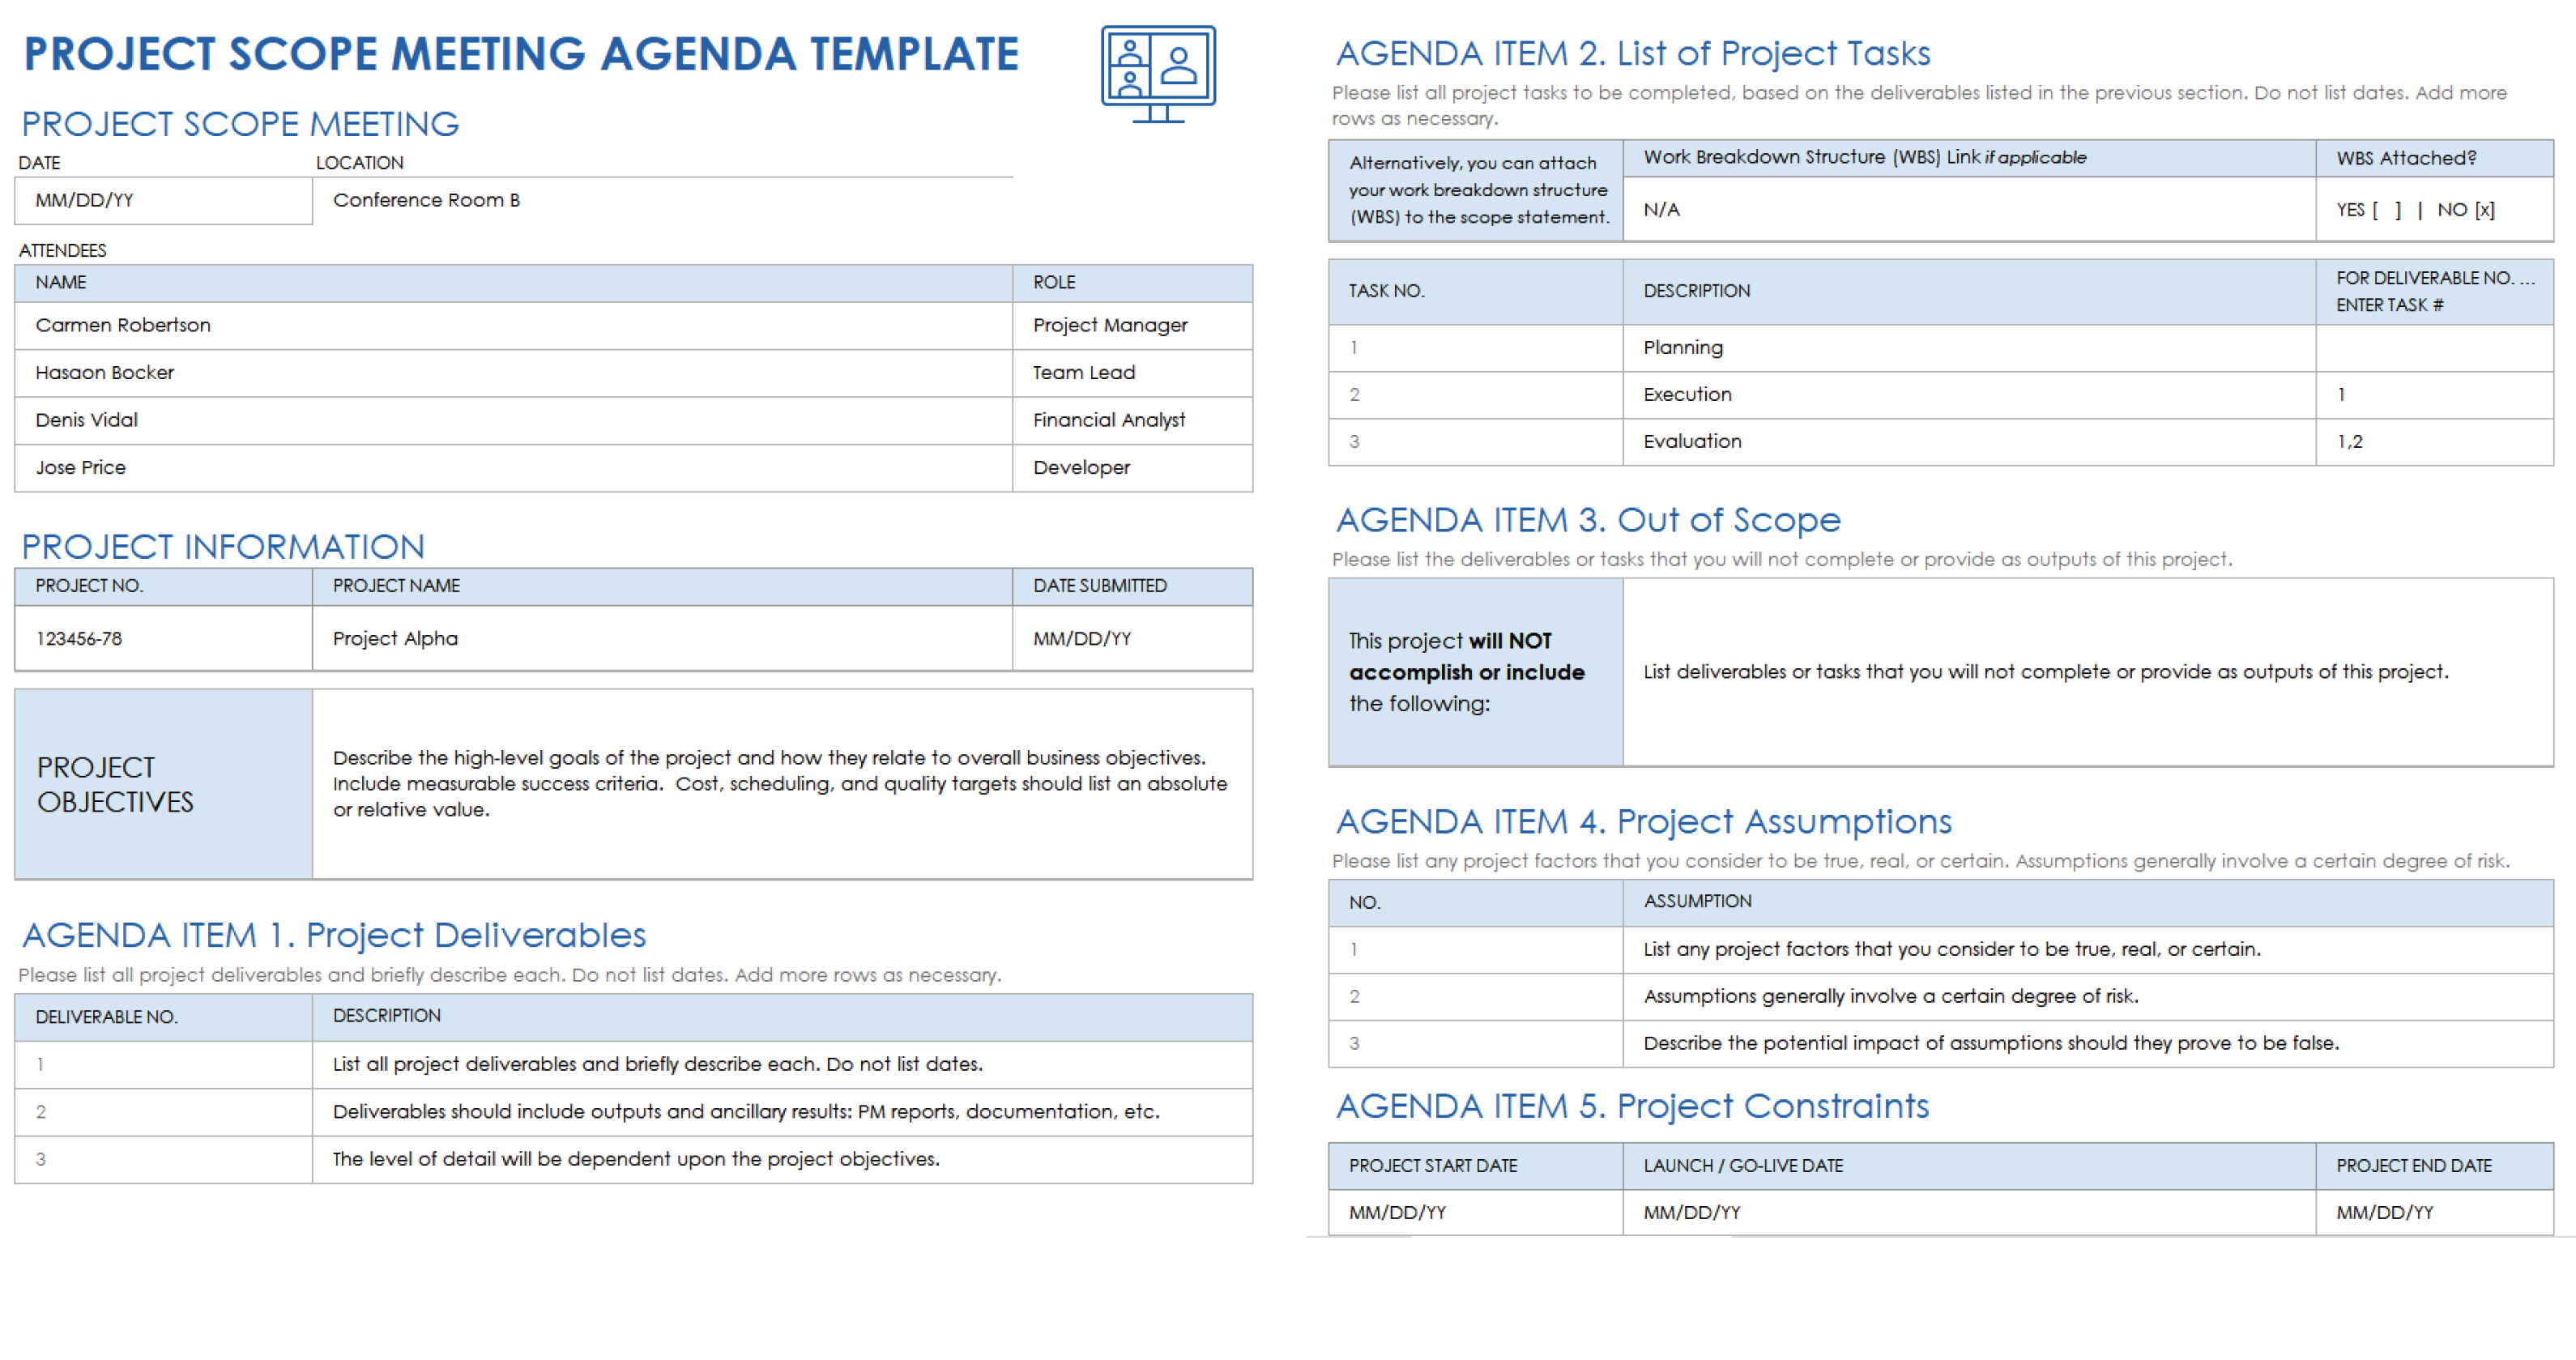 Project Scope Meeting Agenda Template